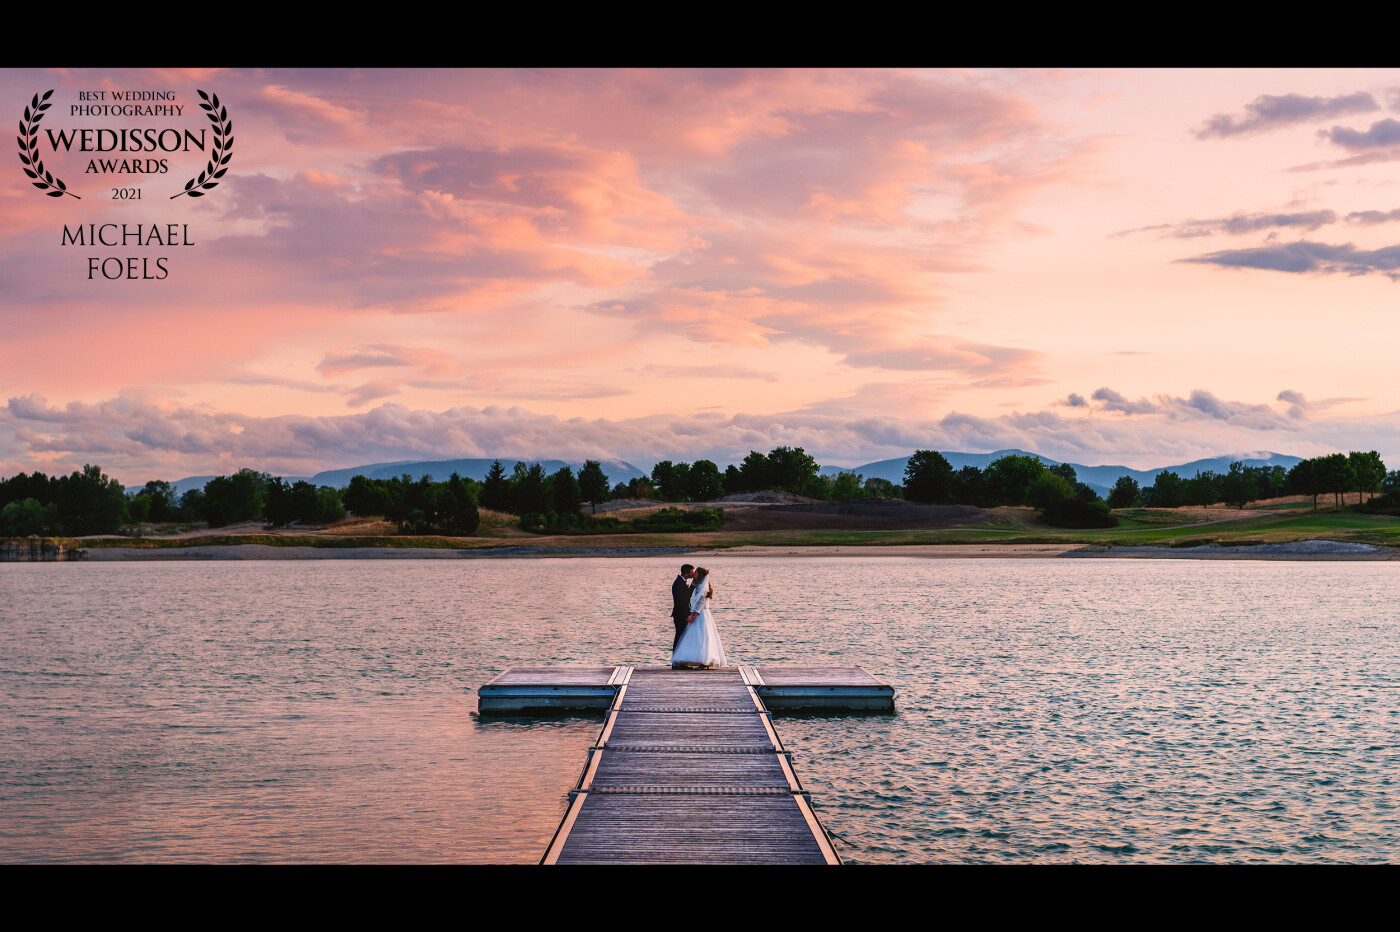 We were afraid that we would not be able to do our sunset shooting because some heavy rain hit the wedding location right after the ceremony. But after patiently waiting the rain went away and we were blessed with a crazy, colorful sky to do some final couple portraits for the day.